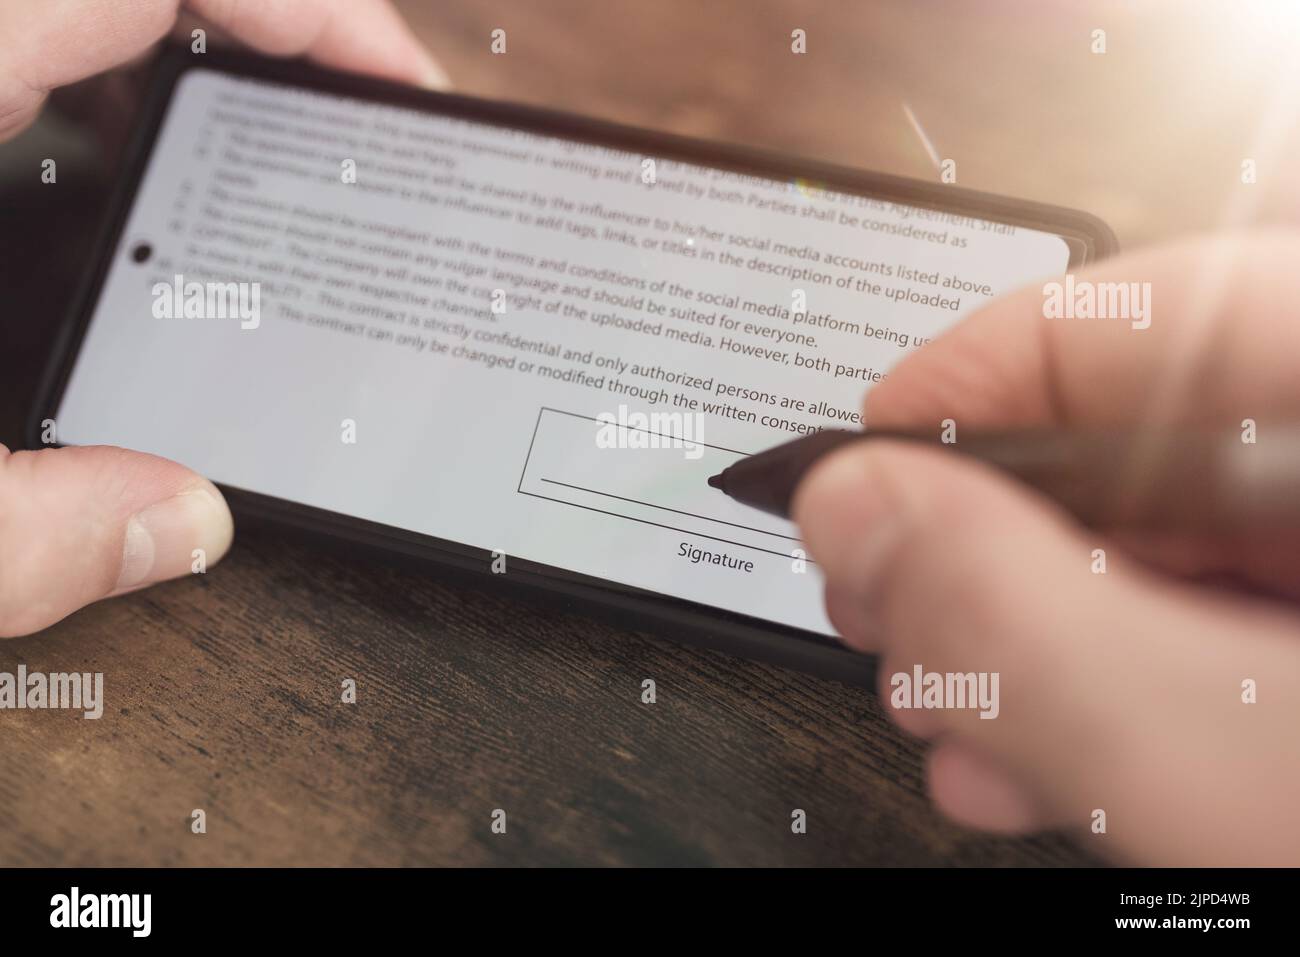 close-up view of electronic signature with stylus on smartphone screen against wooden table background Stock Photo